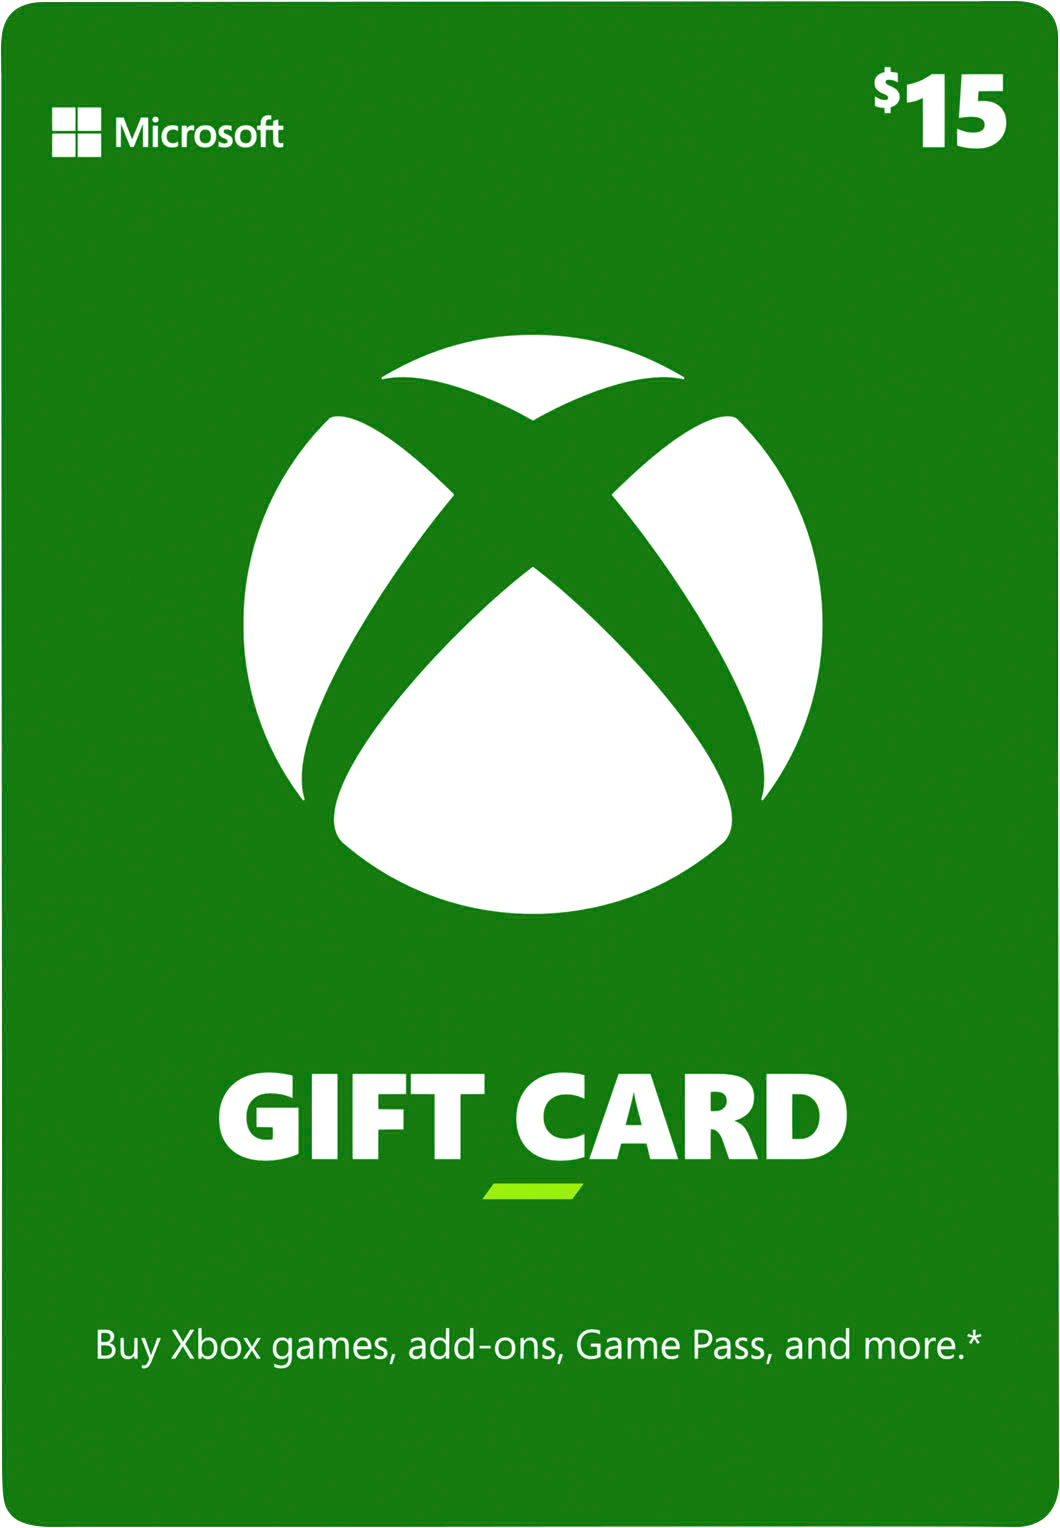 can you buy v bucks with a xbox gift card